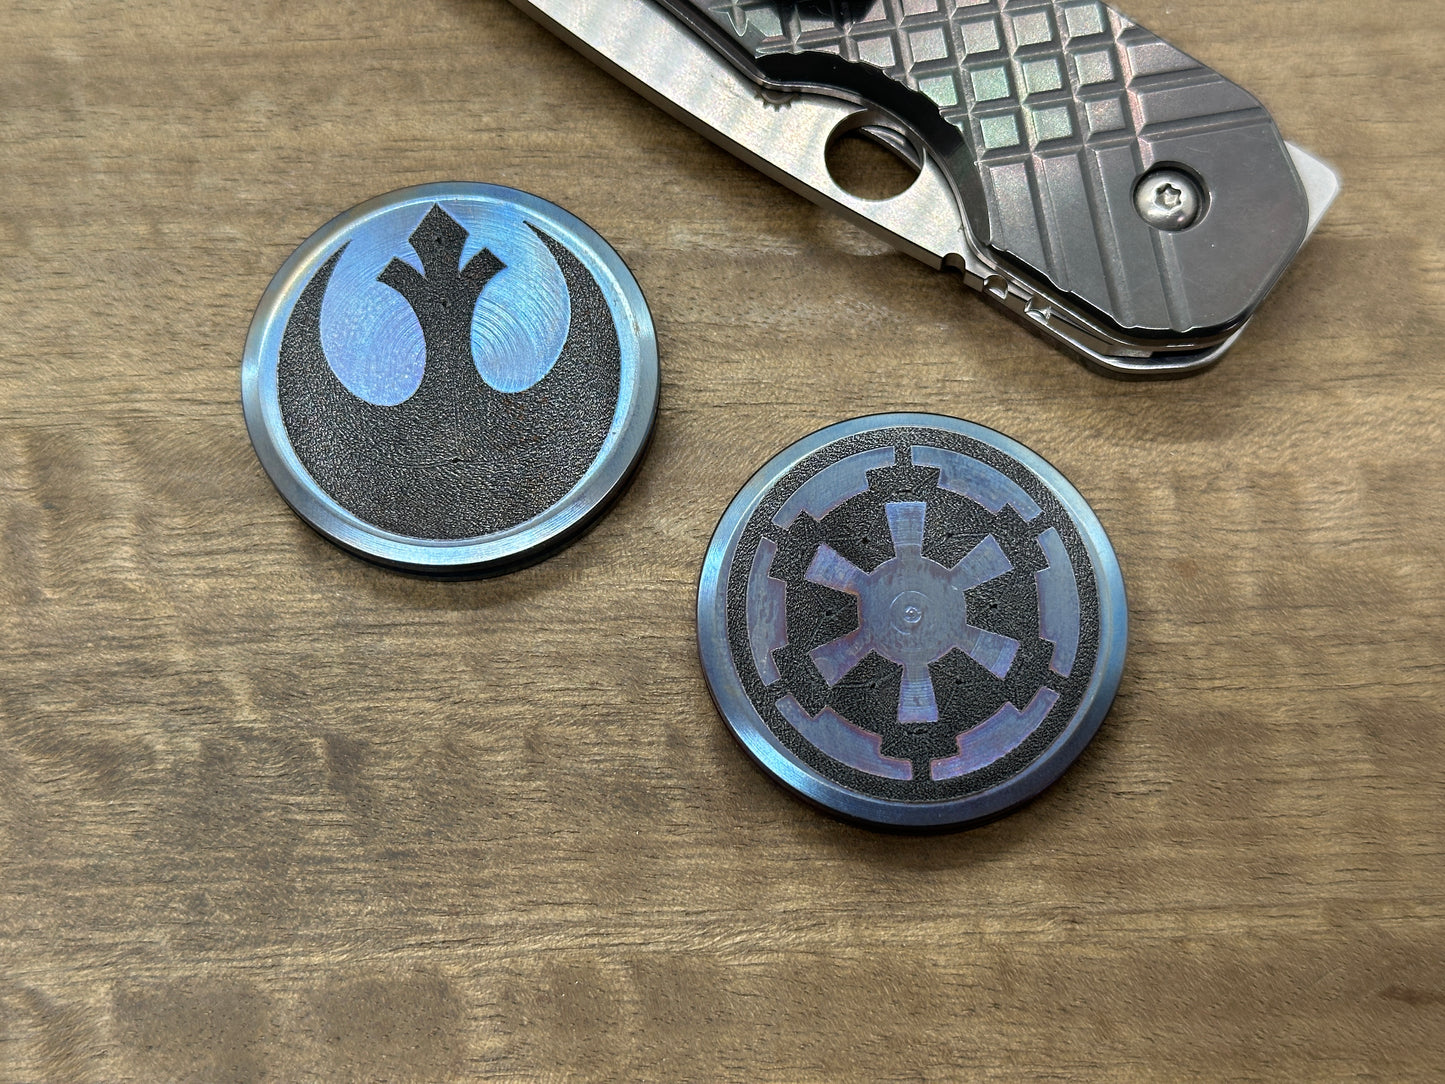 Rebel Alliance vs Imperial Galactic Flamed Stainless Steel HAPTIC Coins CLICKY